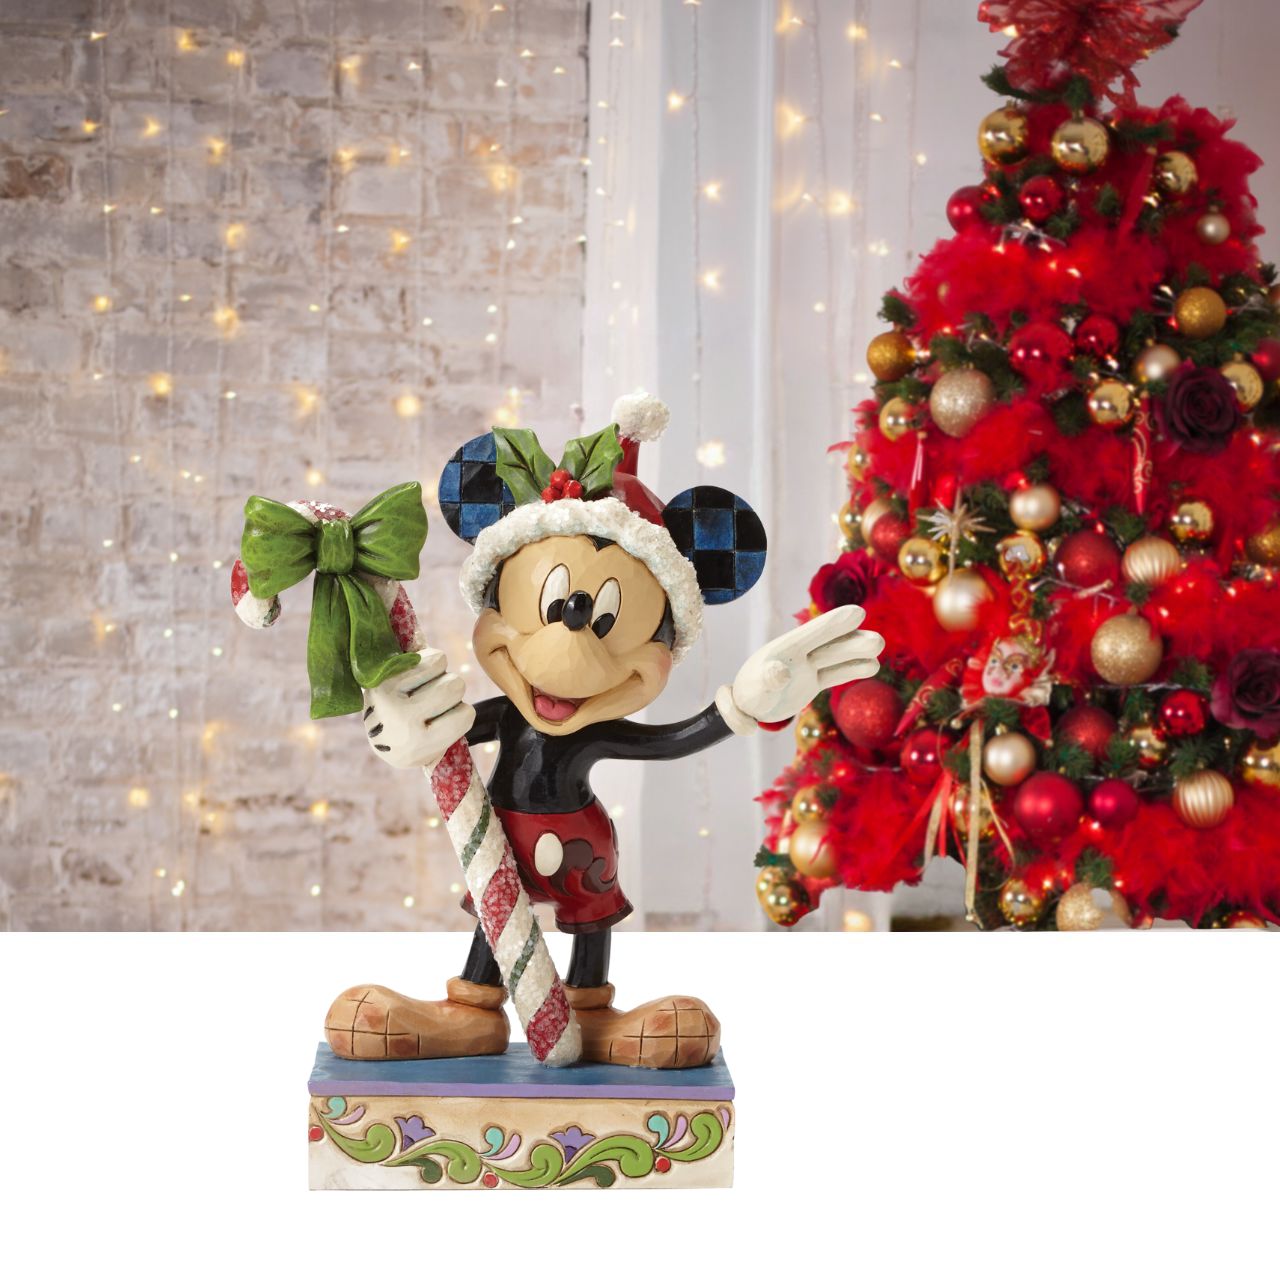 Disney Mickey Mouse Candy Cane Figurine  "Sweet Greetings" A jolly Mickey Mouse brings a gift of sugar coated candy in this delightful Christmas design from the artistry of Jim Shore. Beautifully handcrafted, this eye-catching piece features the classic Disney character decorated in Jim's unique folk art style. The figurine is made from cast stone.